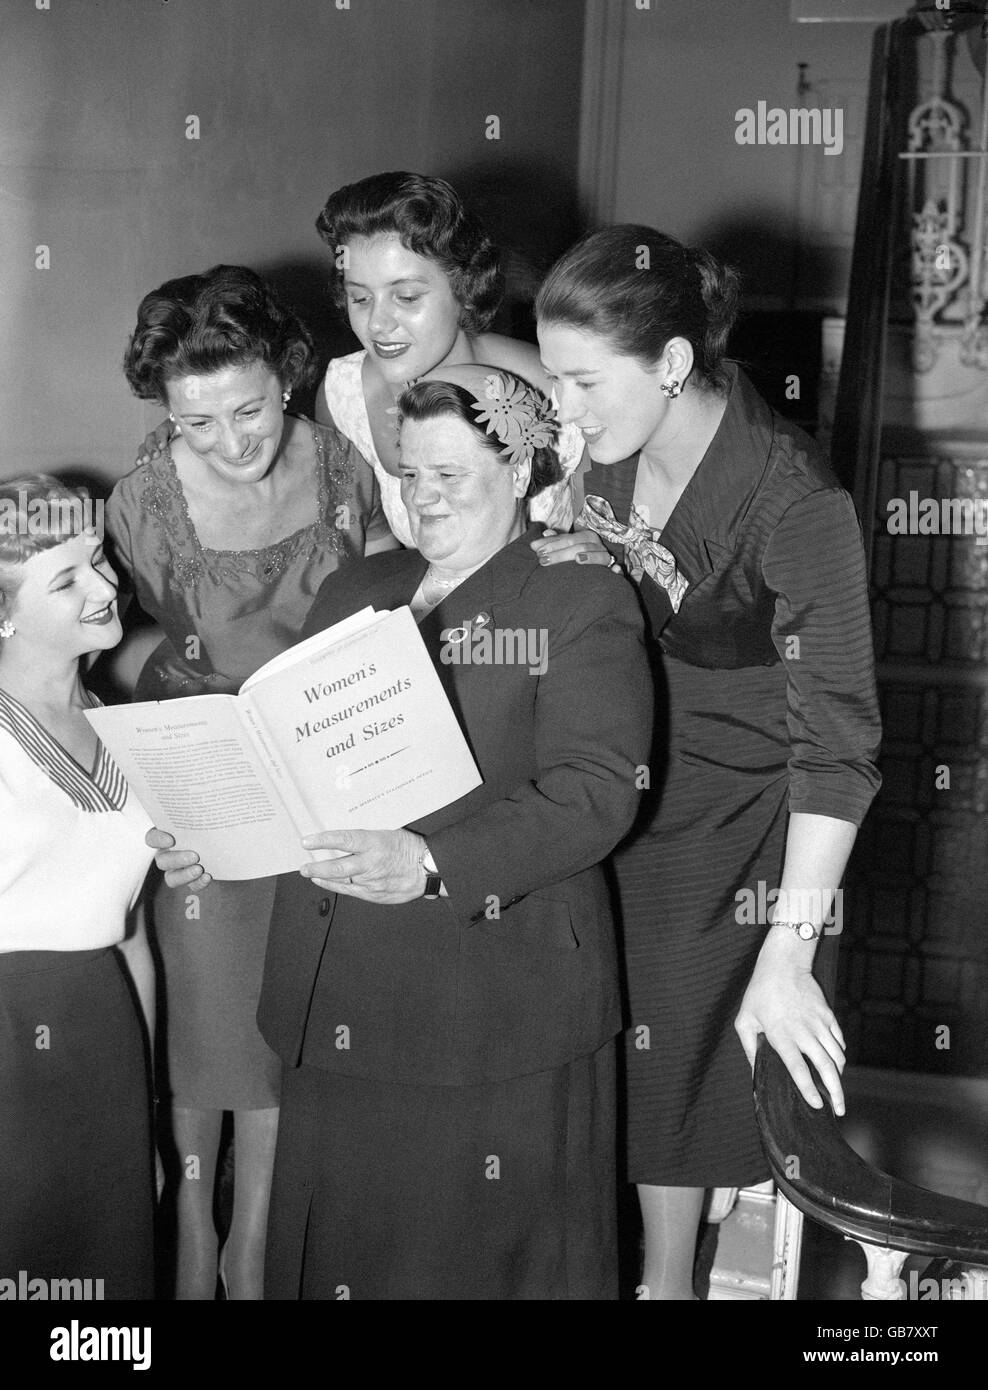 M.P. Bessie Braddock reads the report on woman's measurements and sizes. Looking over her shoulder from left to right are Miss Small, Miss Regular, Miss Medium, and Miss Tall. These are figures standardised in the report, the most comprehensive 'vital statistics' study undertaken in the Britain. Bessie Braddock took the chair in the press conference in connection with the report. The inquiry sought to provide up to date scientific data of Britain's women to aid manufacturers of womens clothes. Stock Photo